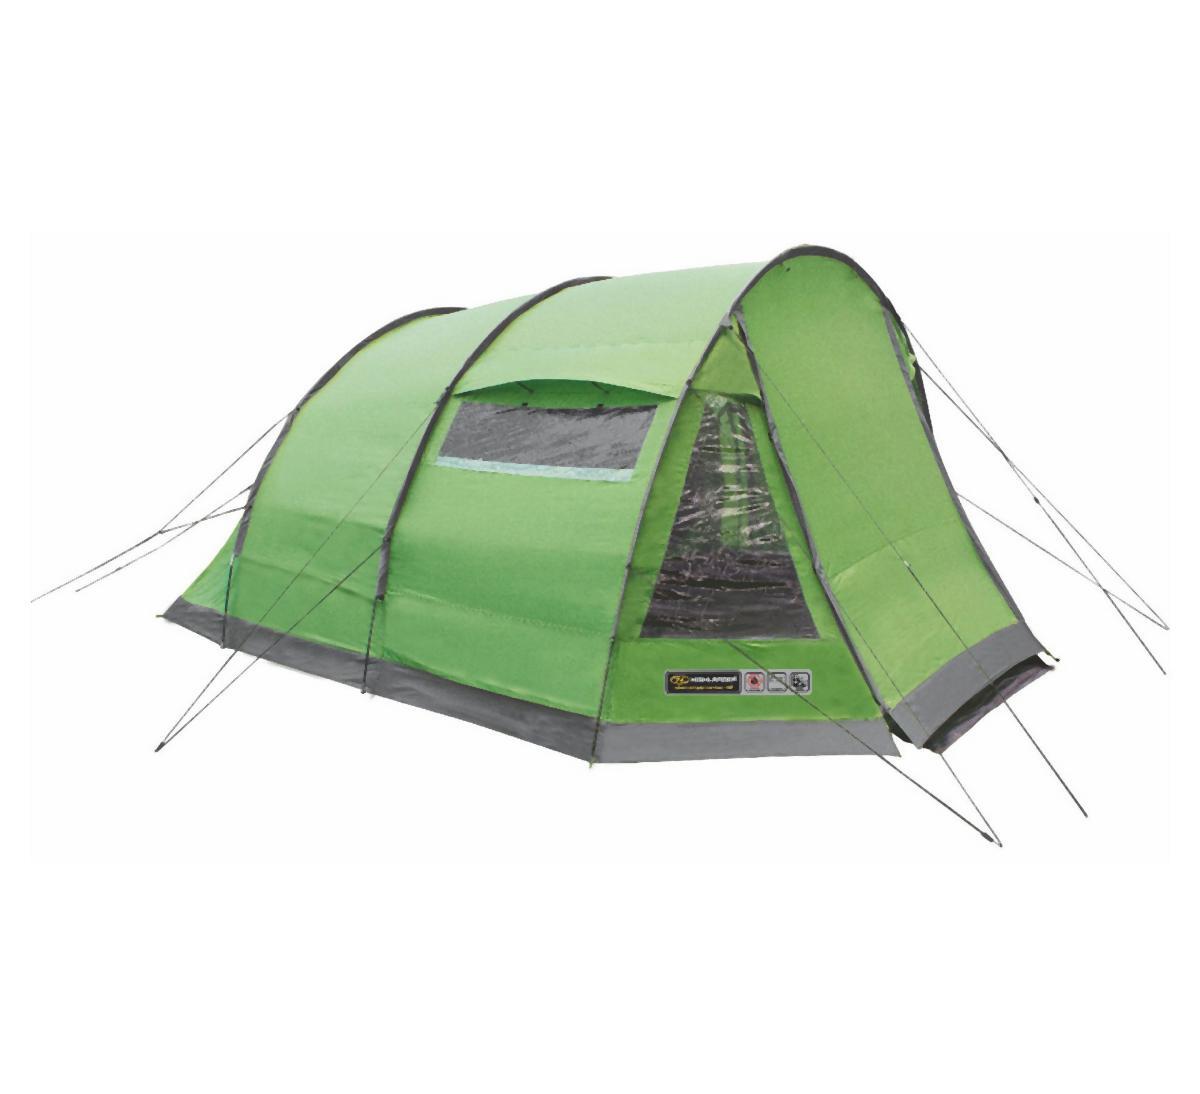 Highlander Sycamore 5 - Tunneltent - 5-Persoons - Groen